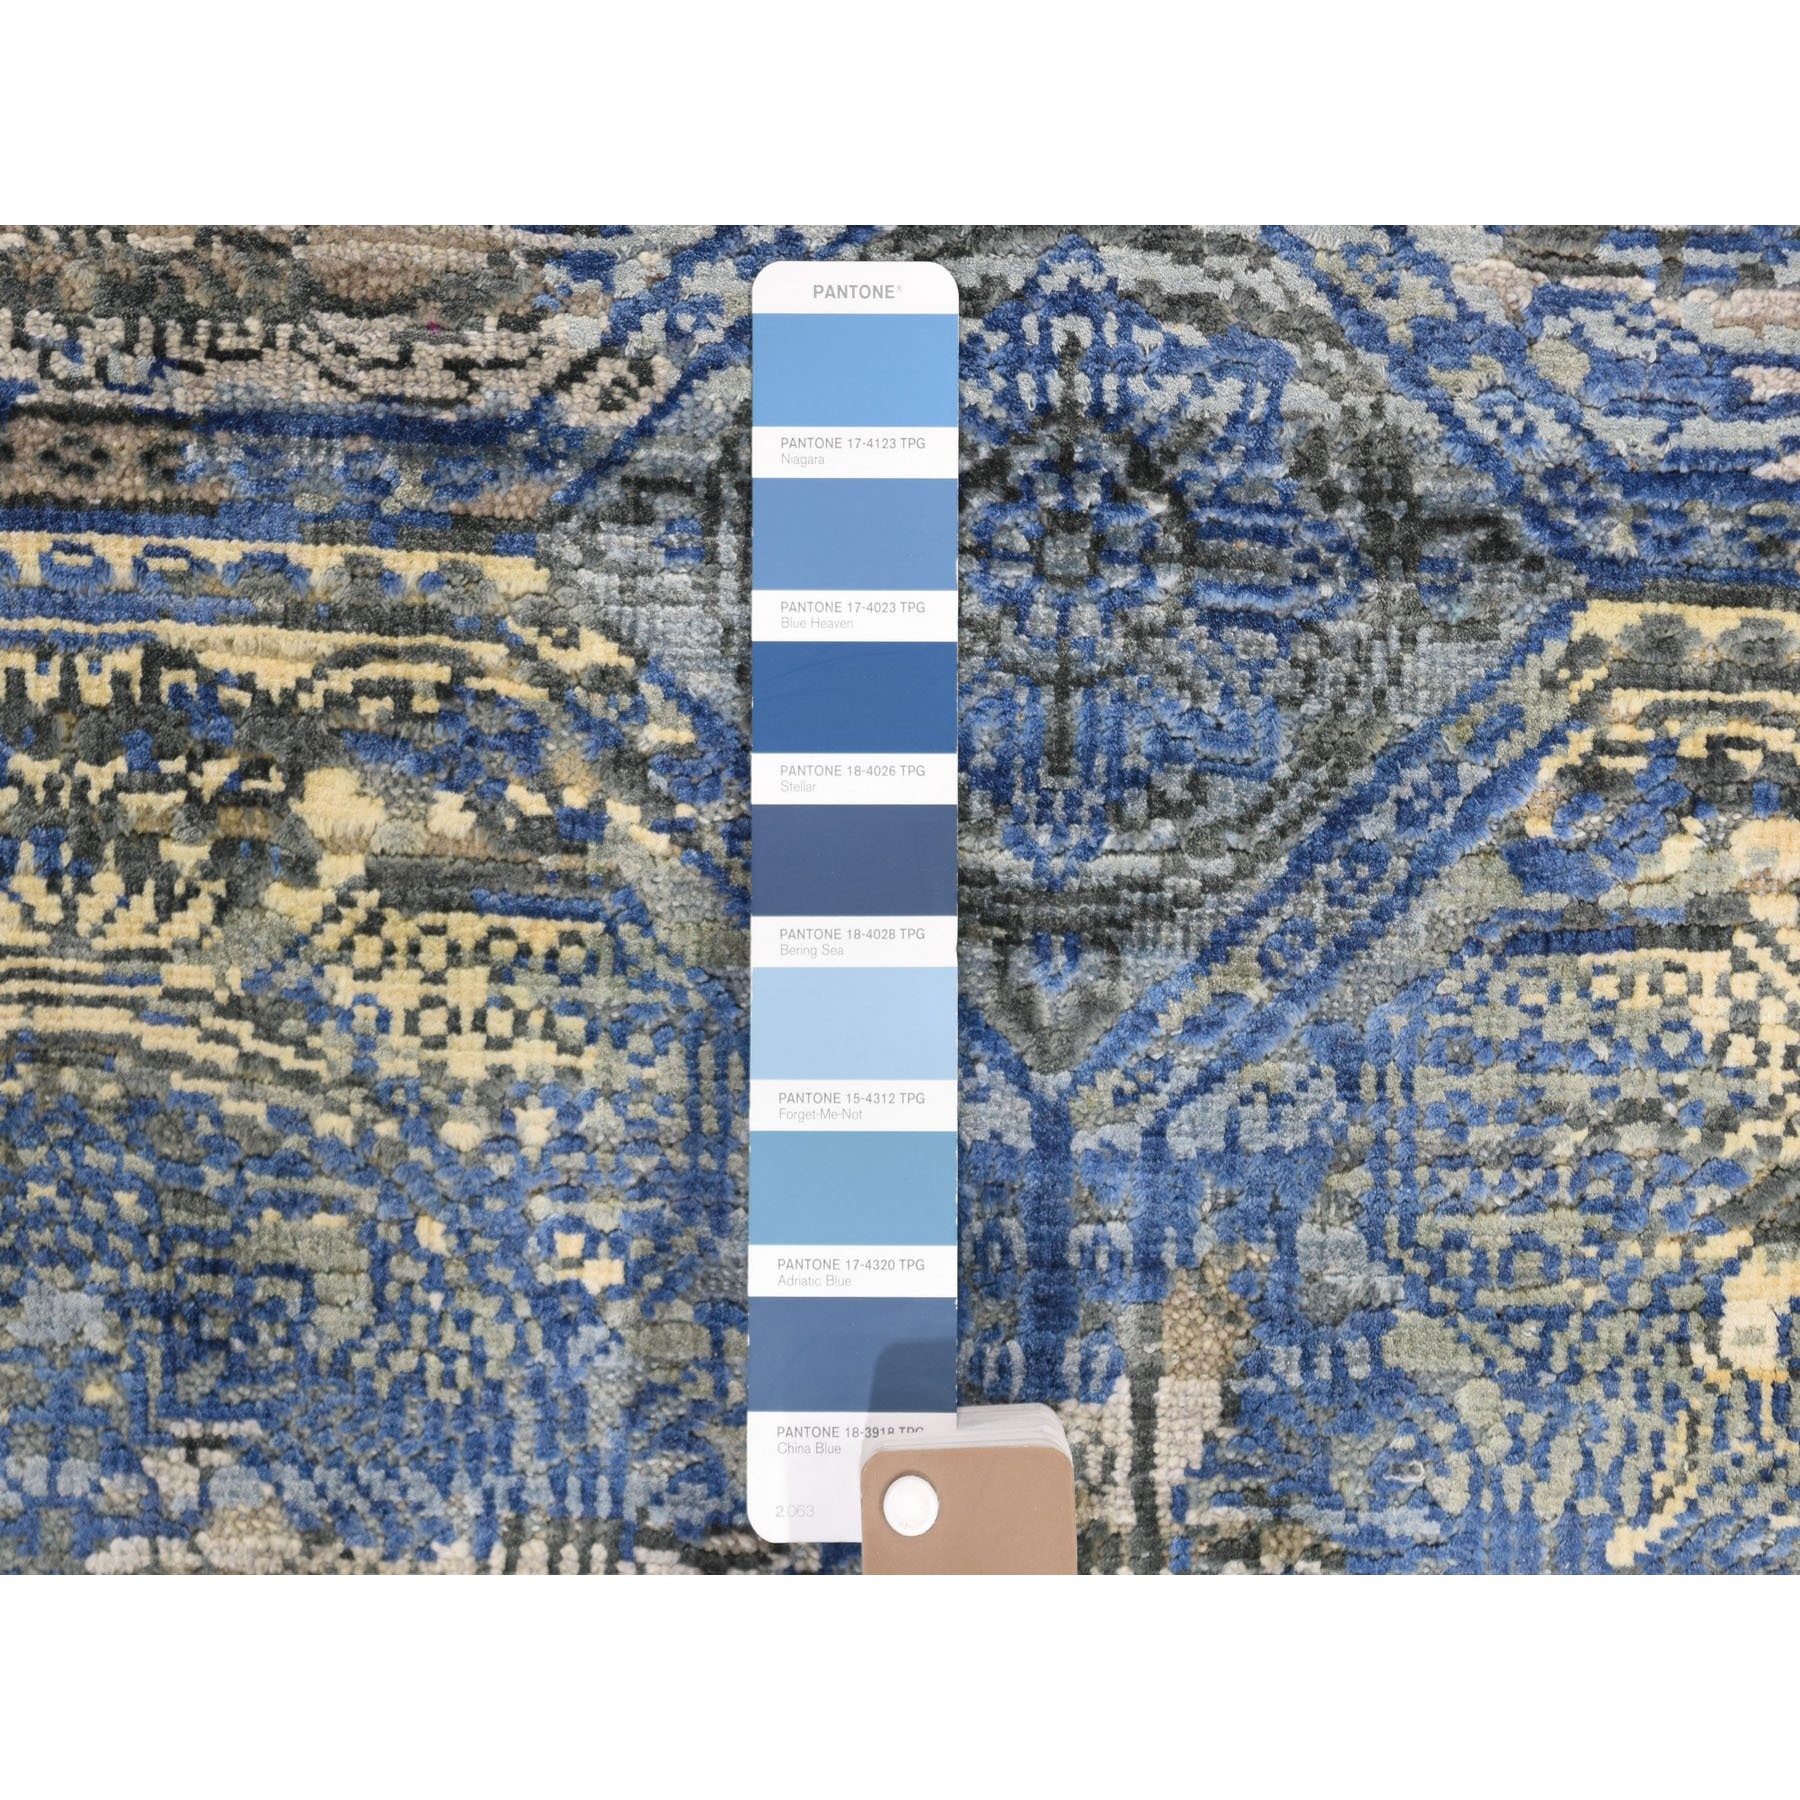 2-8 x9-1  Blue Silk With Textured Wool Rossets Design Runner Hand Knotted Oriental Rug 